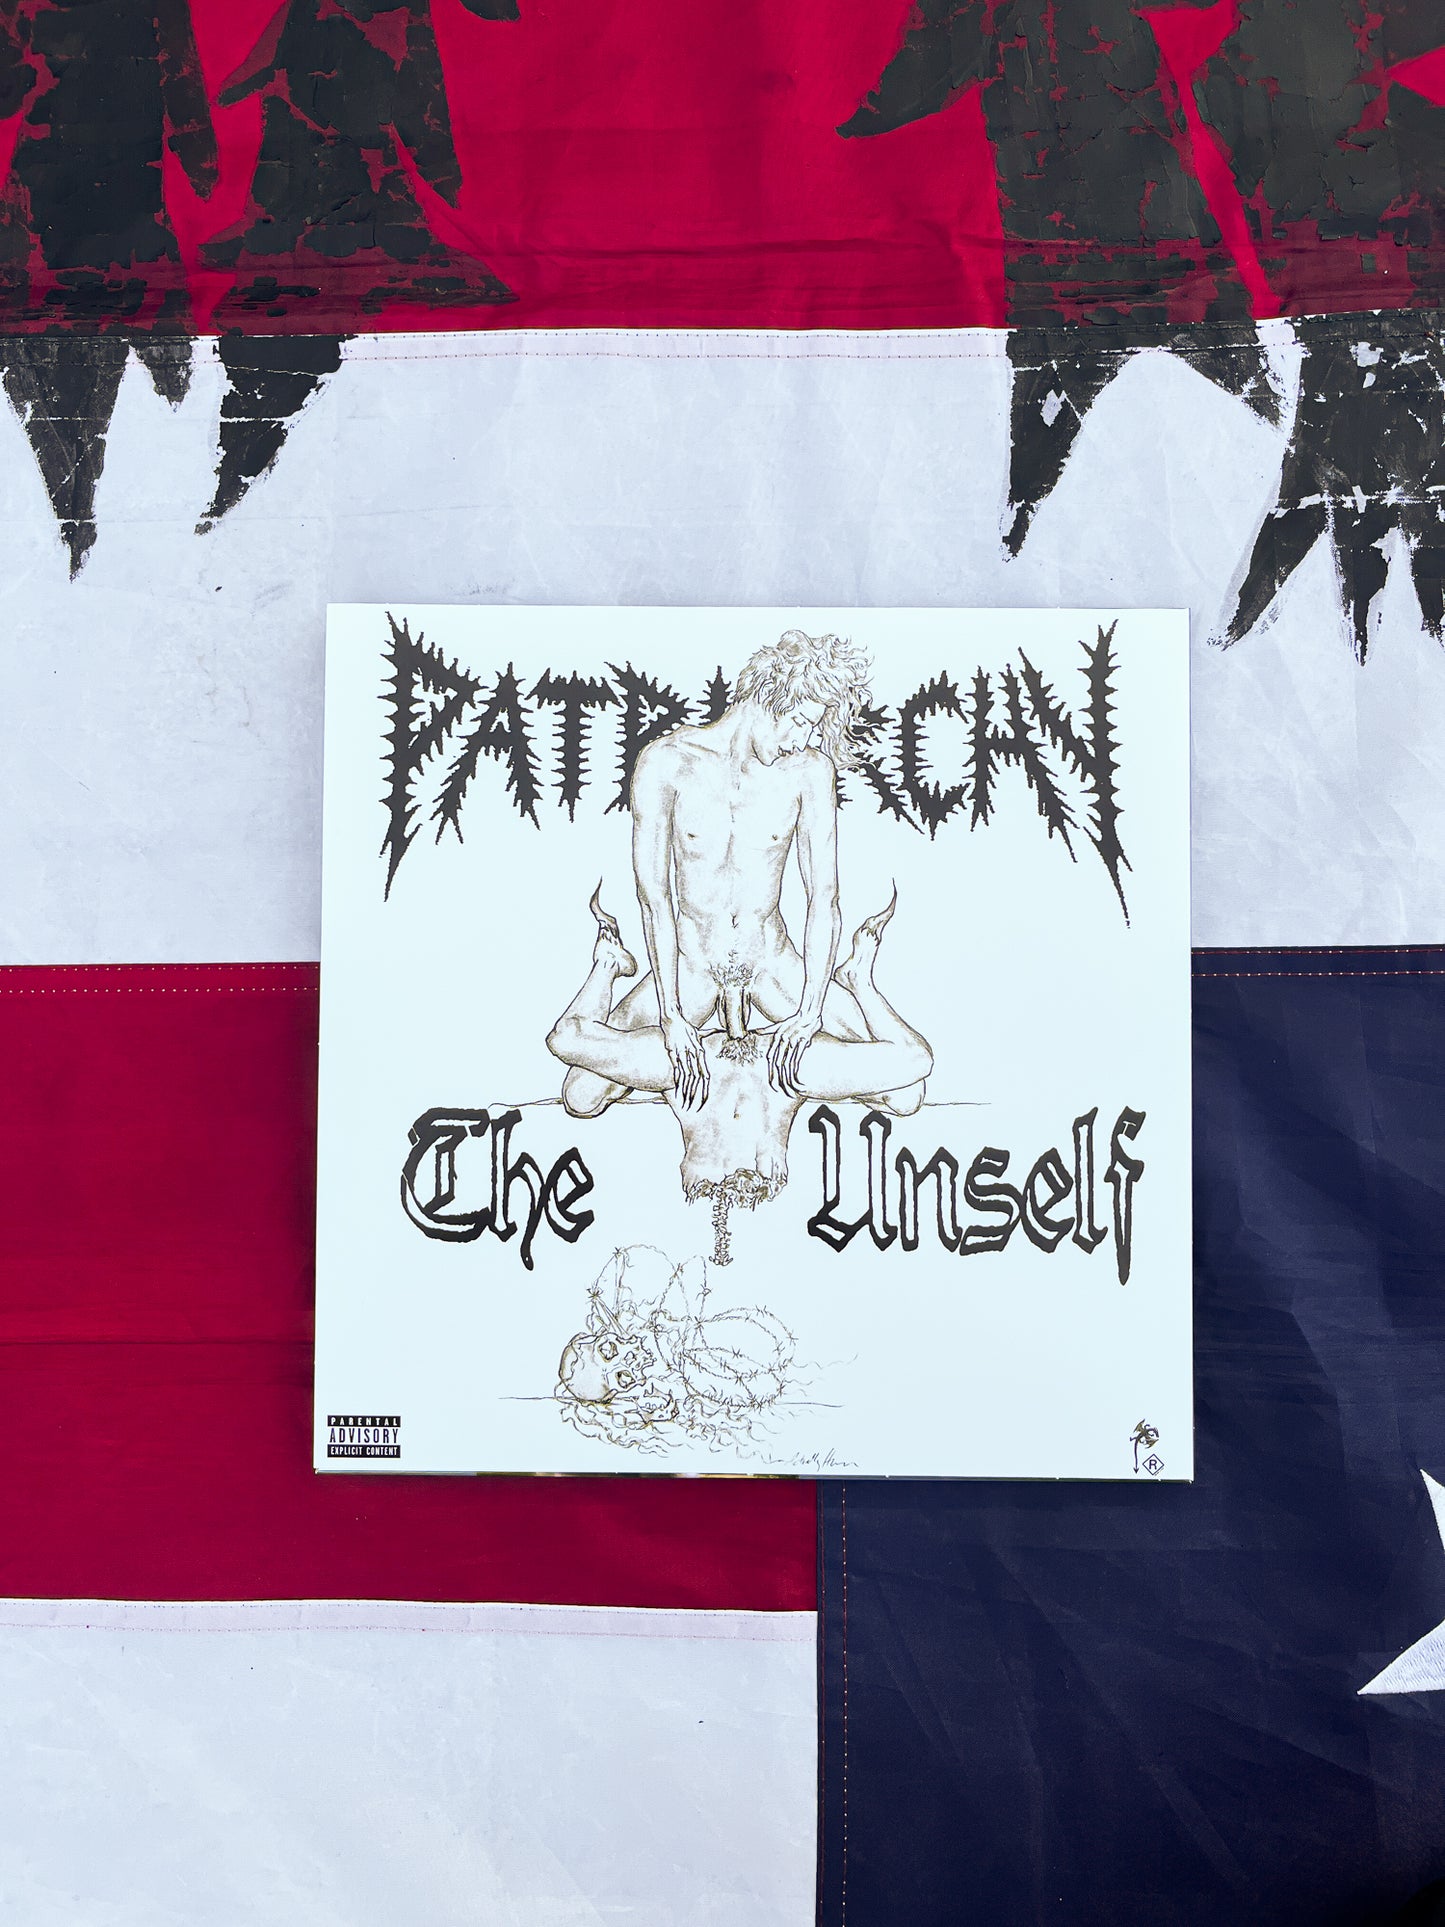 Patriarchy 'The Unself' Deluxe Vinyl LP, Signed